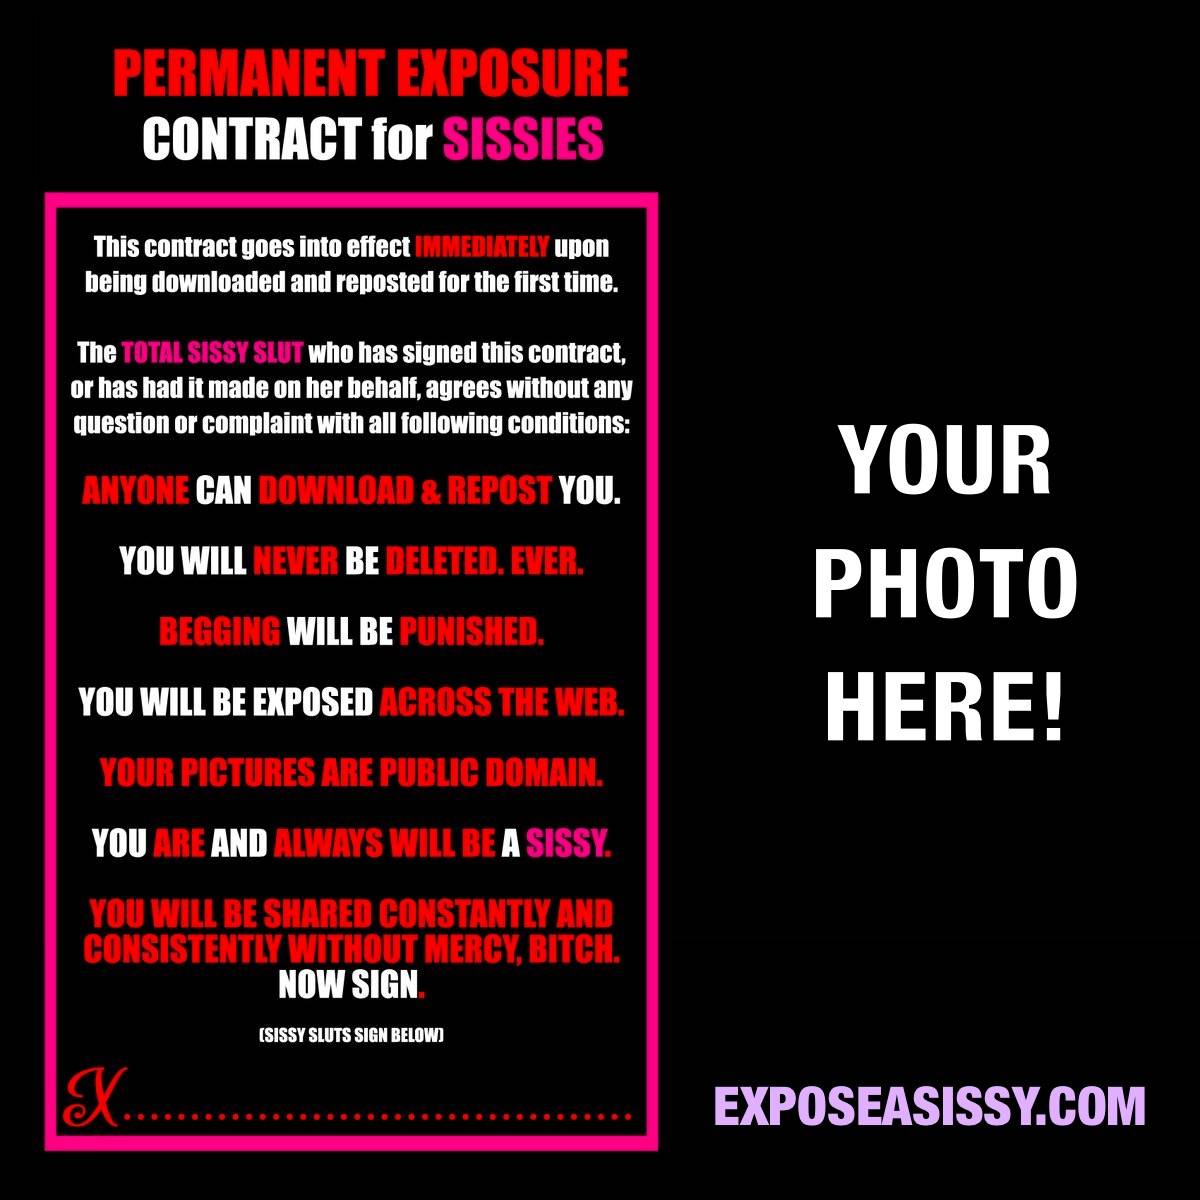 Expose A Sissy Sissy Exposure Sign Up